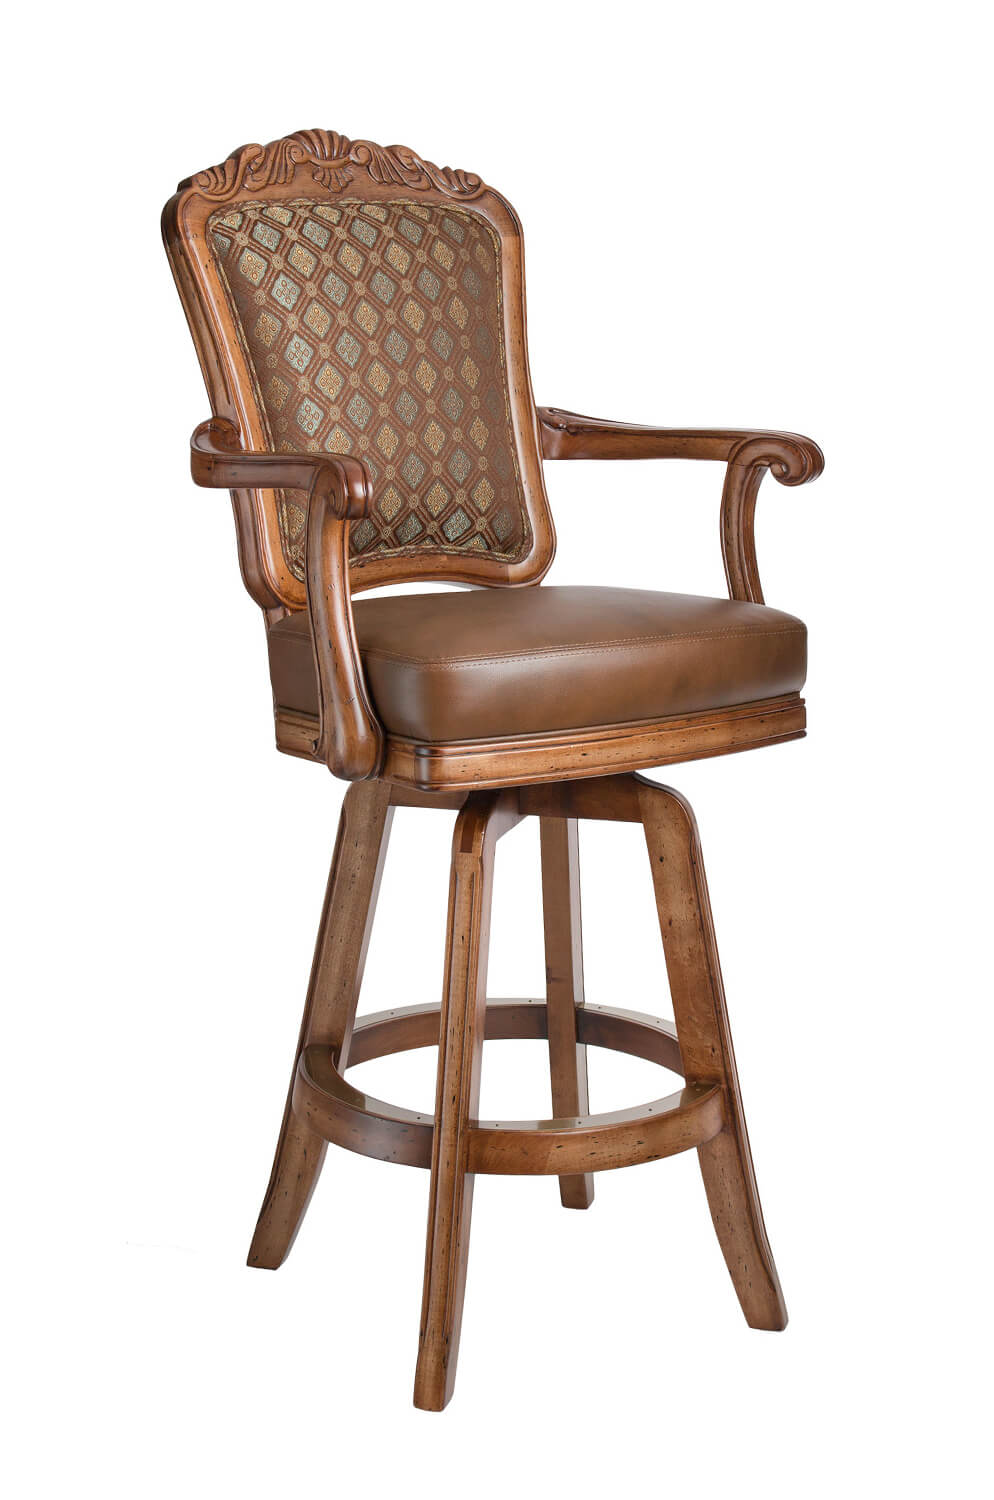 Darafeev's Centurion Wood Upholstered Swivel Stool with Arms